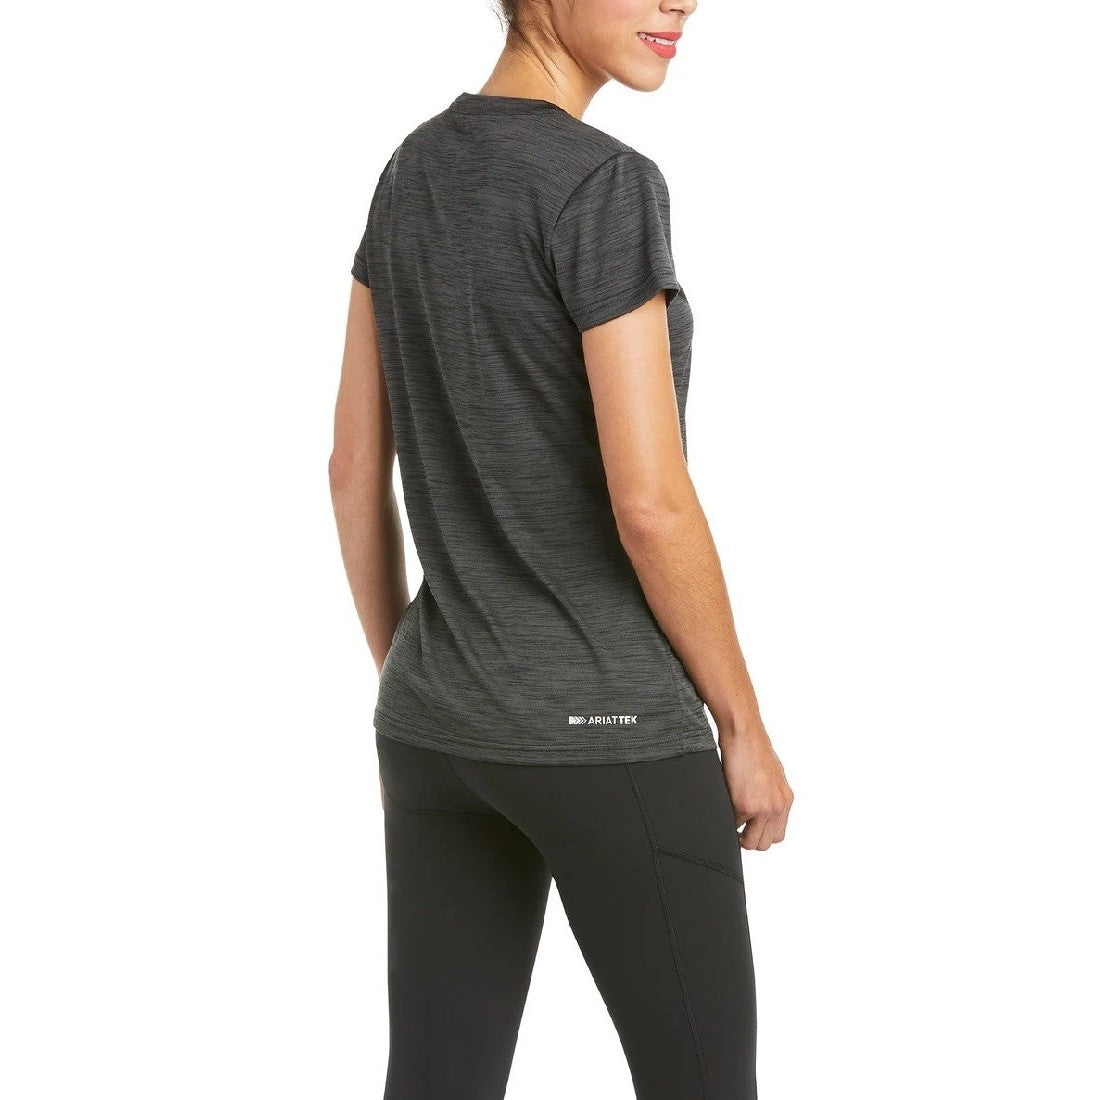 Ladies Charcoal Ariat Top with Laguna Logo, Short Sleeve S21-Ascot Saddlery-The Equestrian